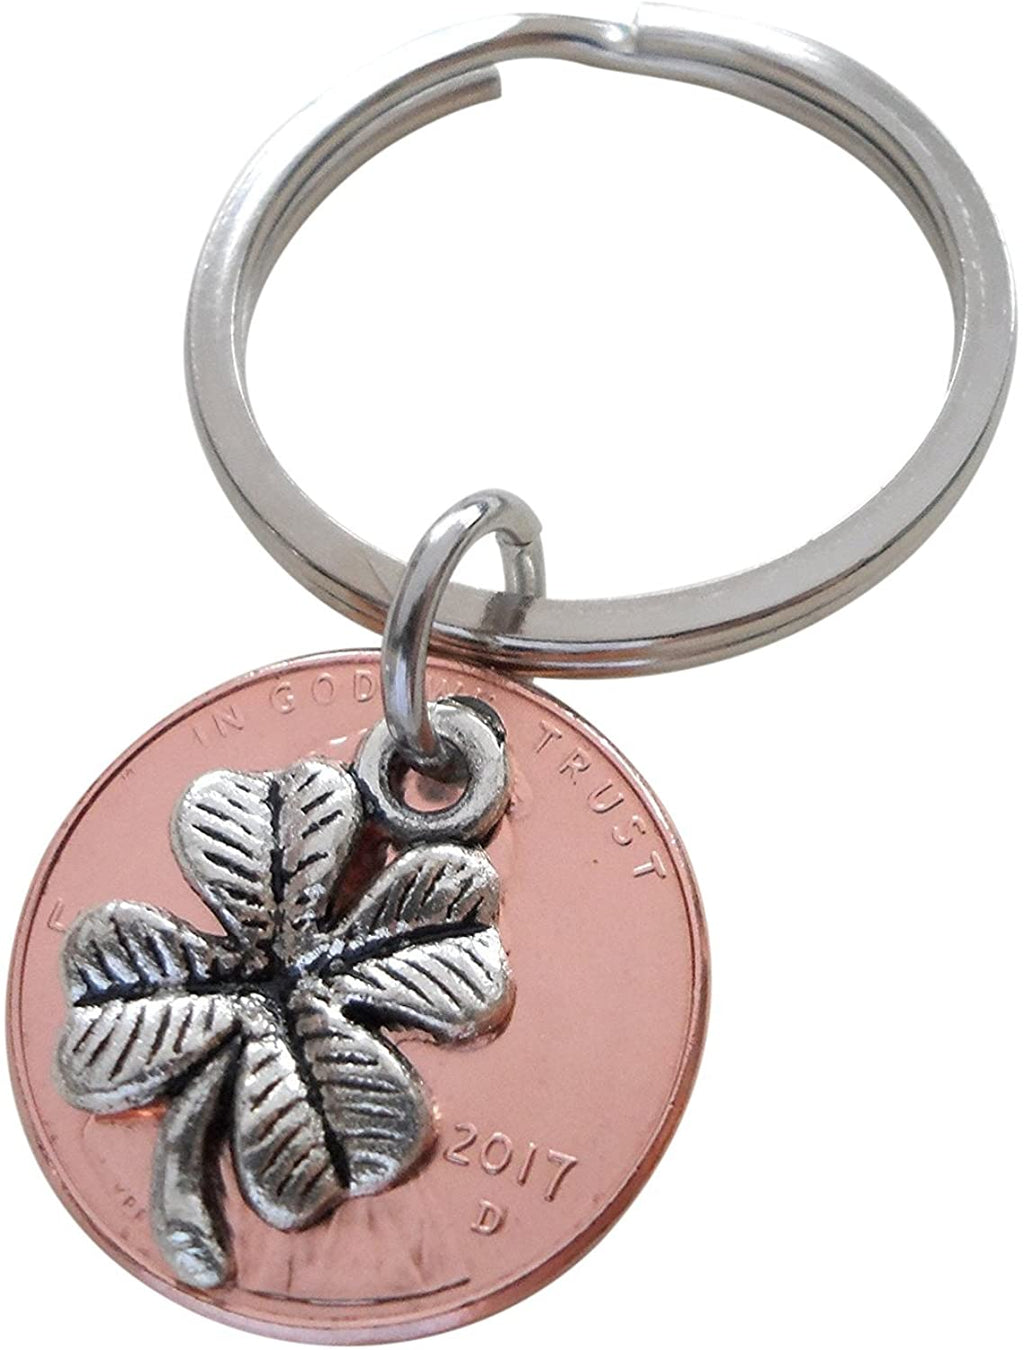 Clover Charm Layered Over 2017 Penny Keychain; 5 Year Anniversary Gift, Couples Keychain